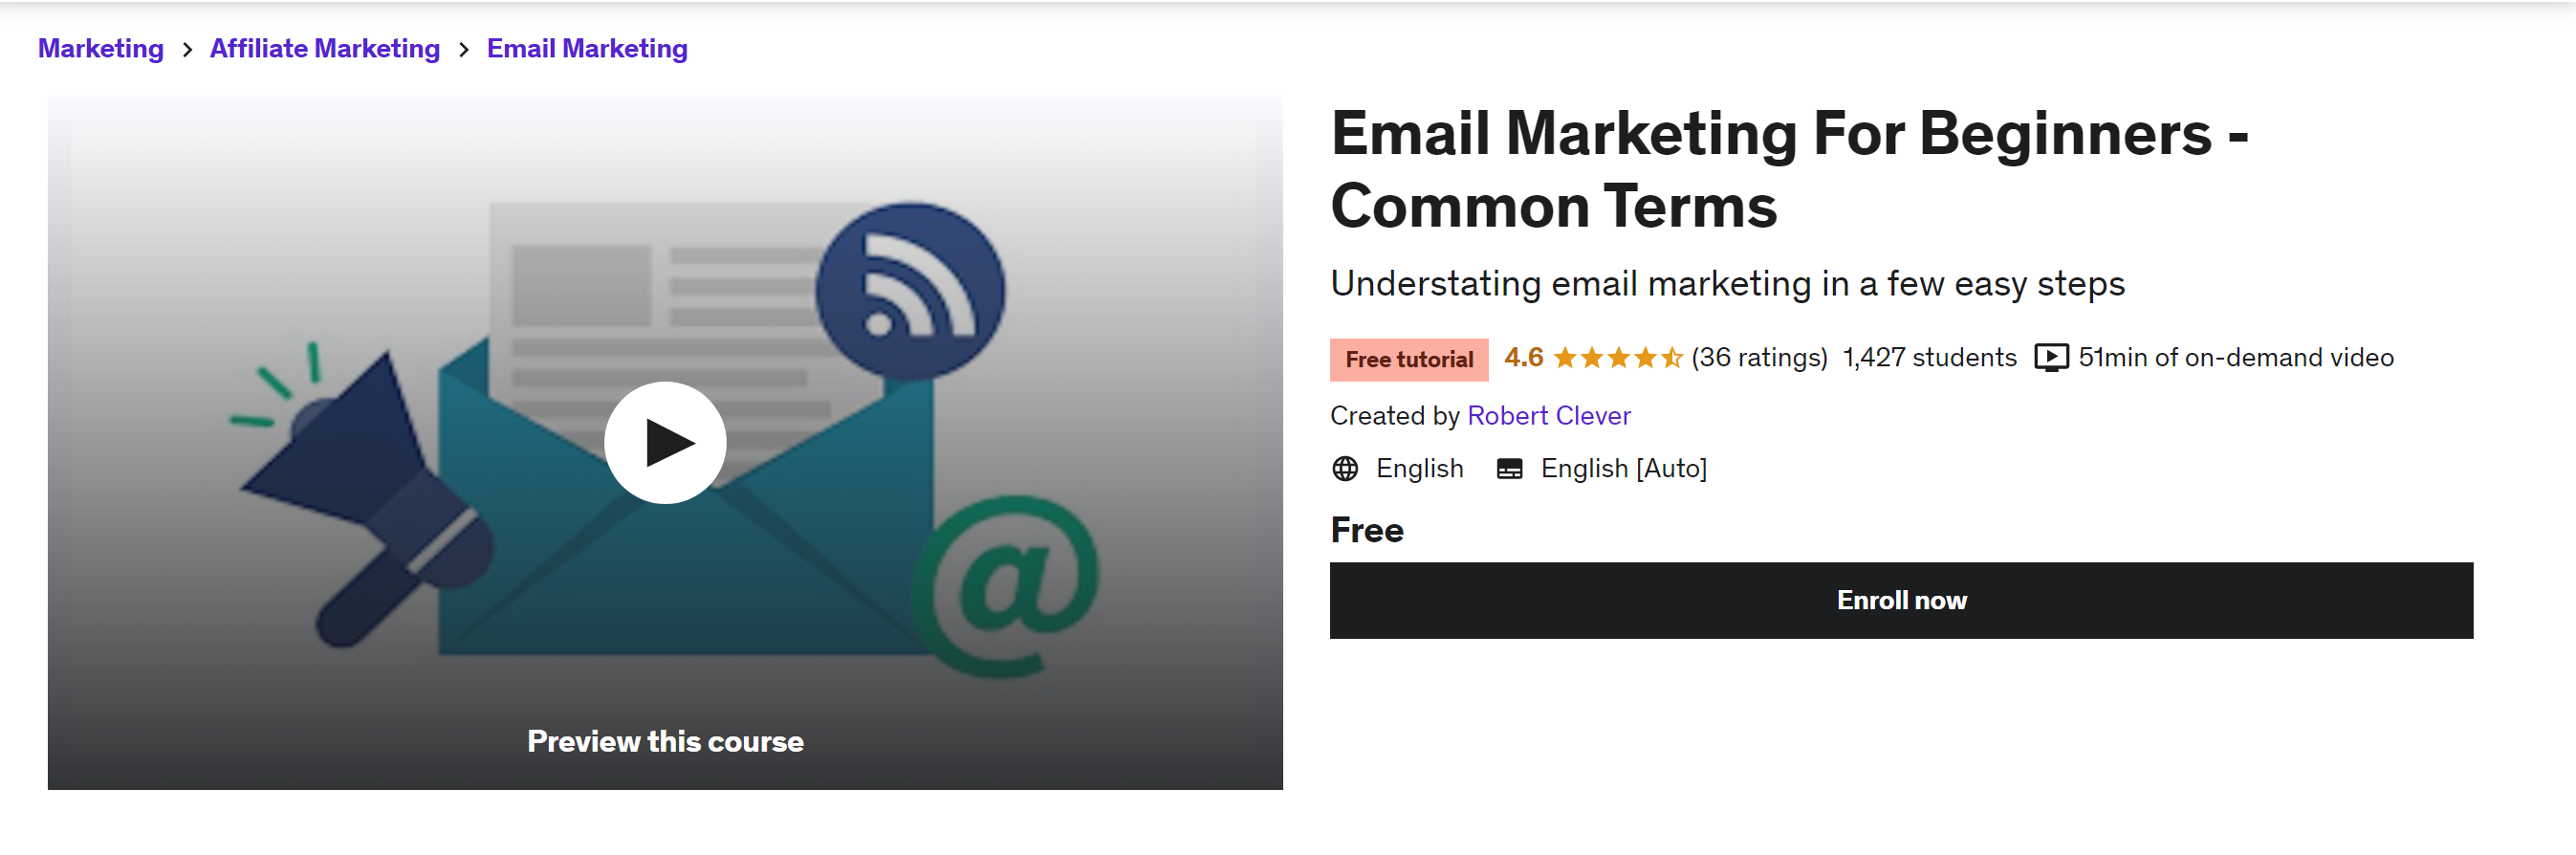 E-mail marketing for beginners - common terms